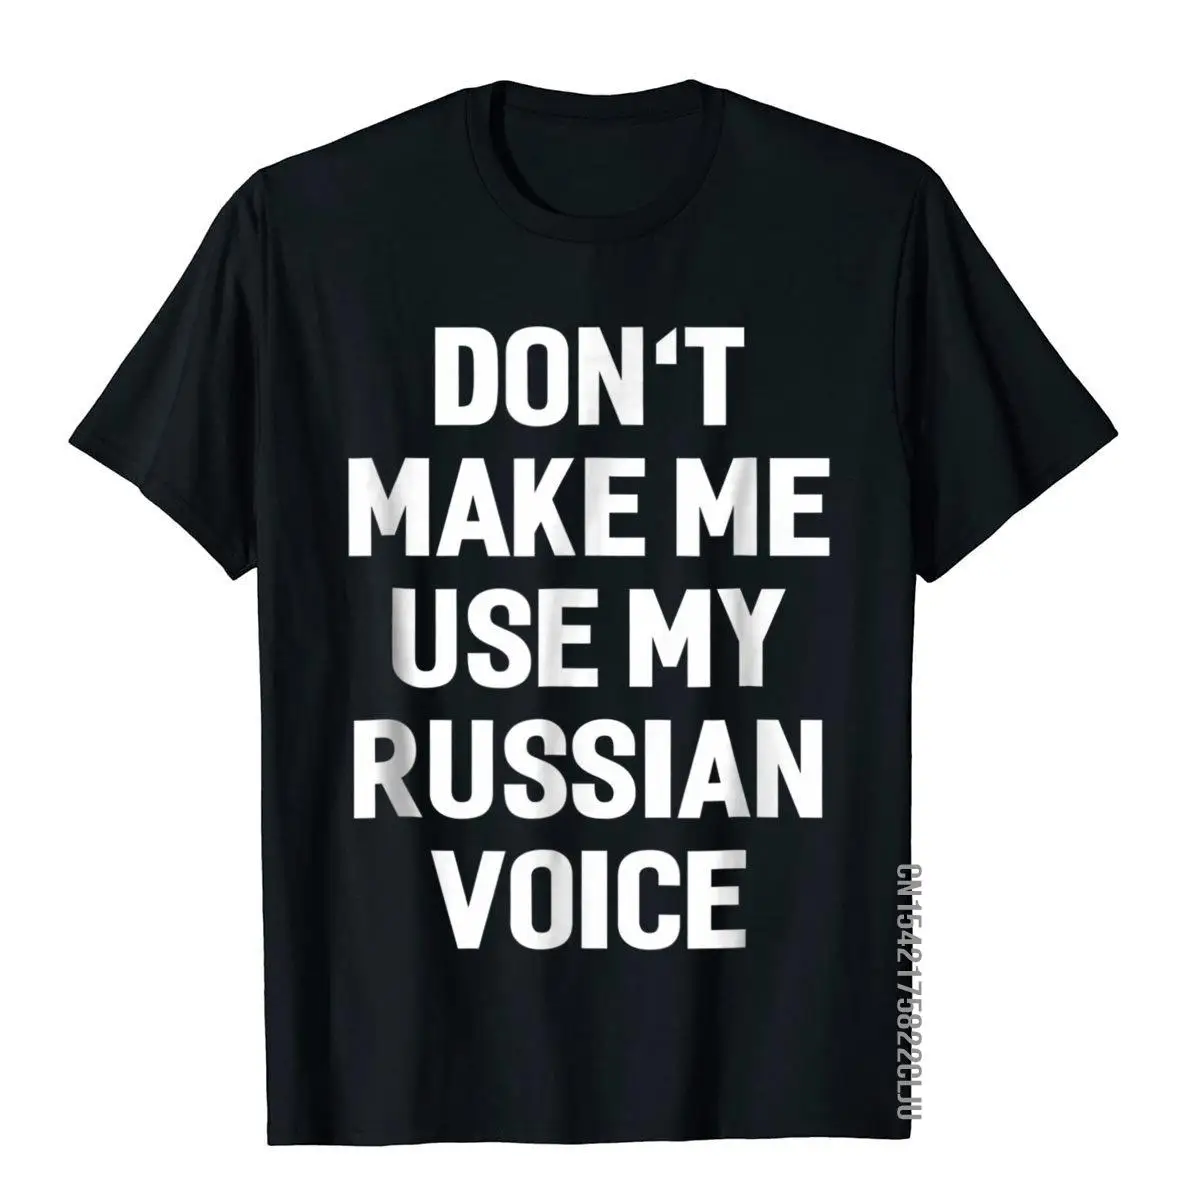 

Don't Make Me Use My Russian Voice Funny Sayings T-Shirt Designer Mens T Shirts Customized Tops T Shirt Cotton Comfortable